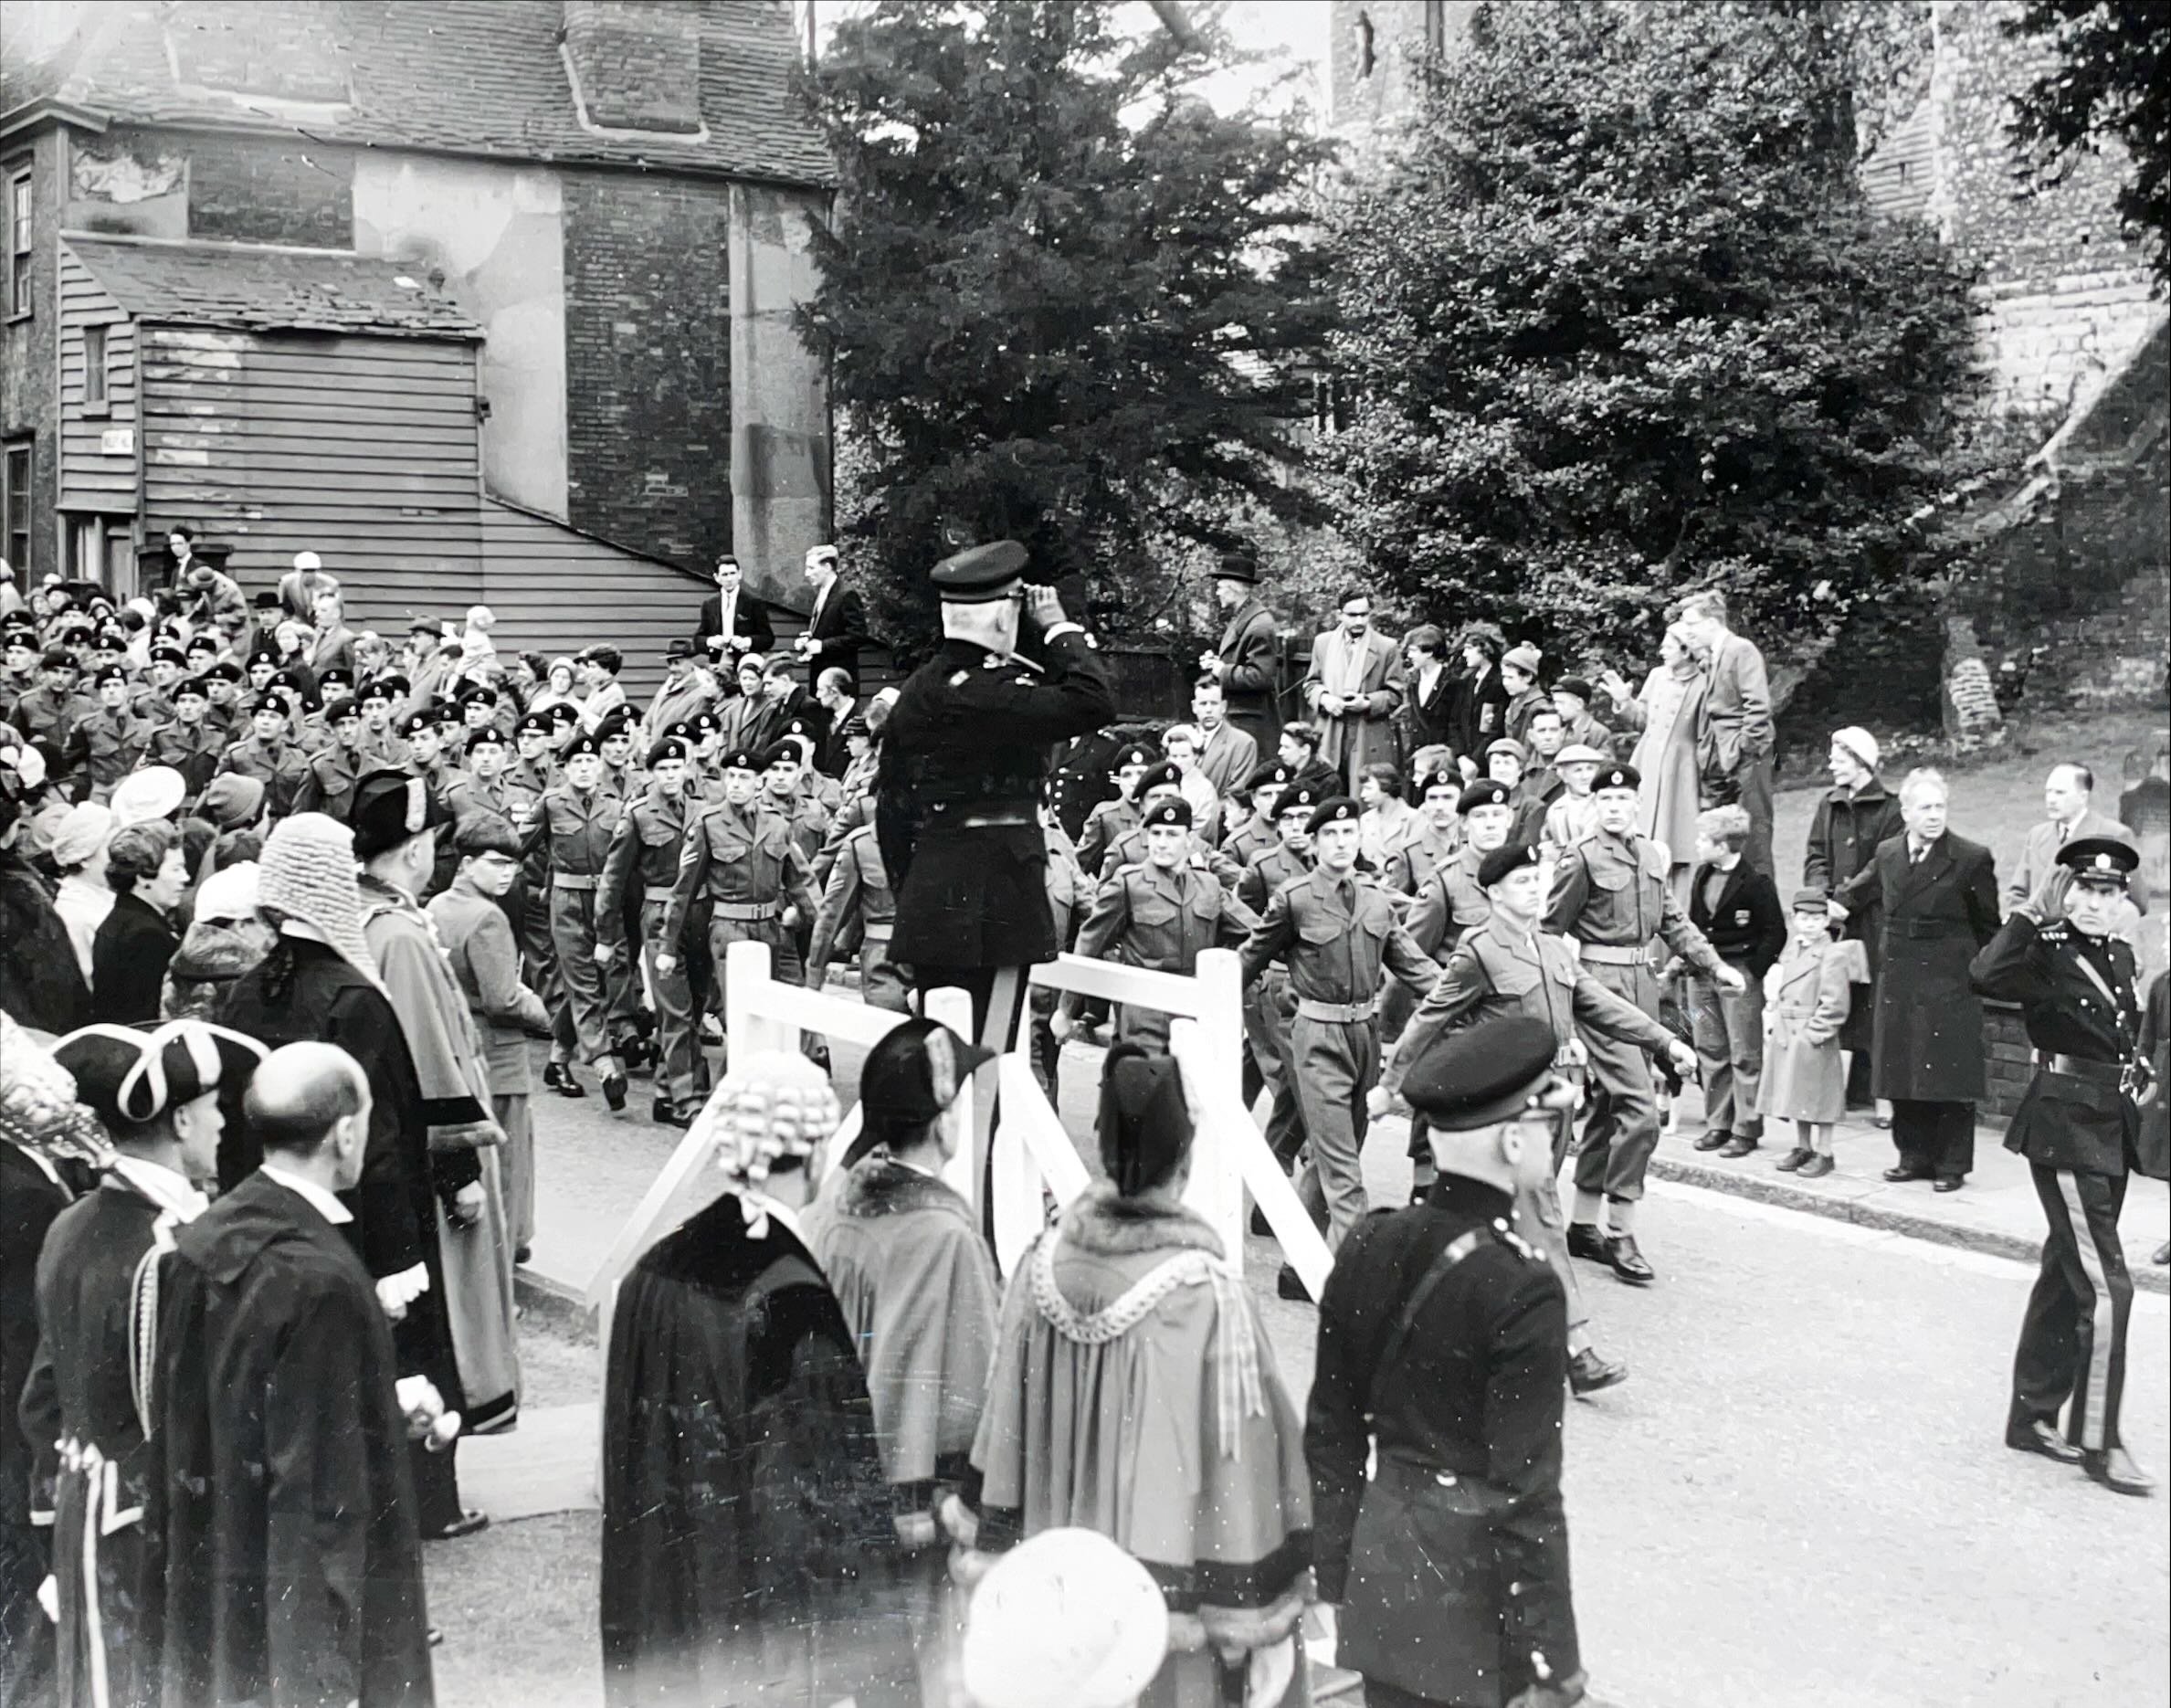 Members of the RE Association march past after Cathedral service, April 1959